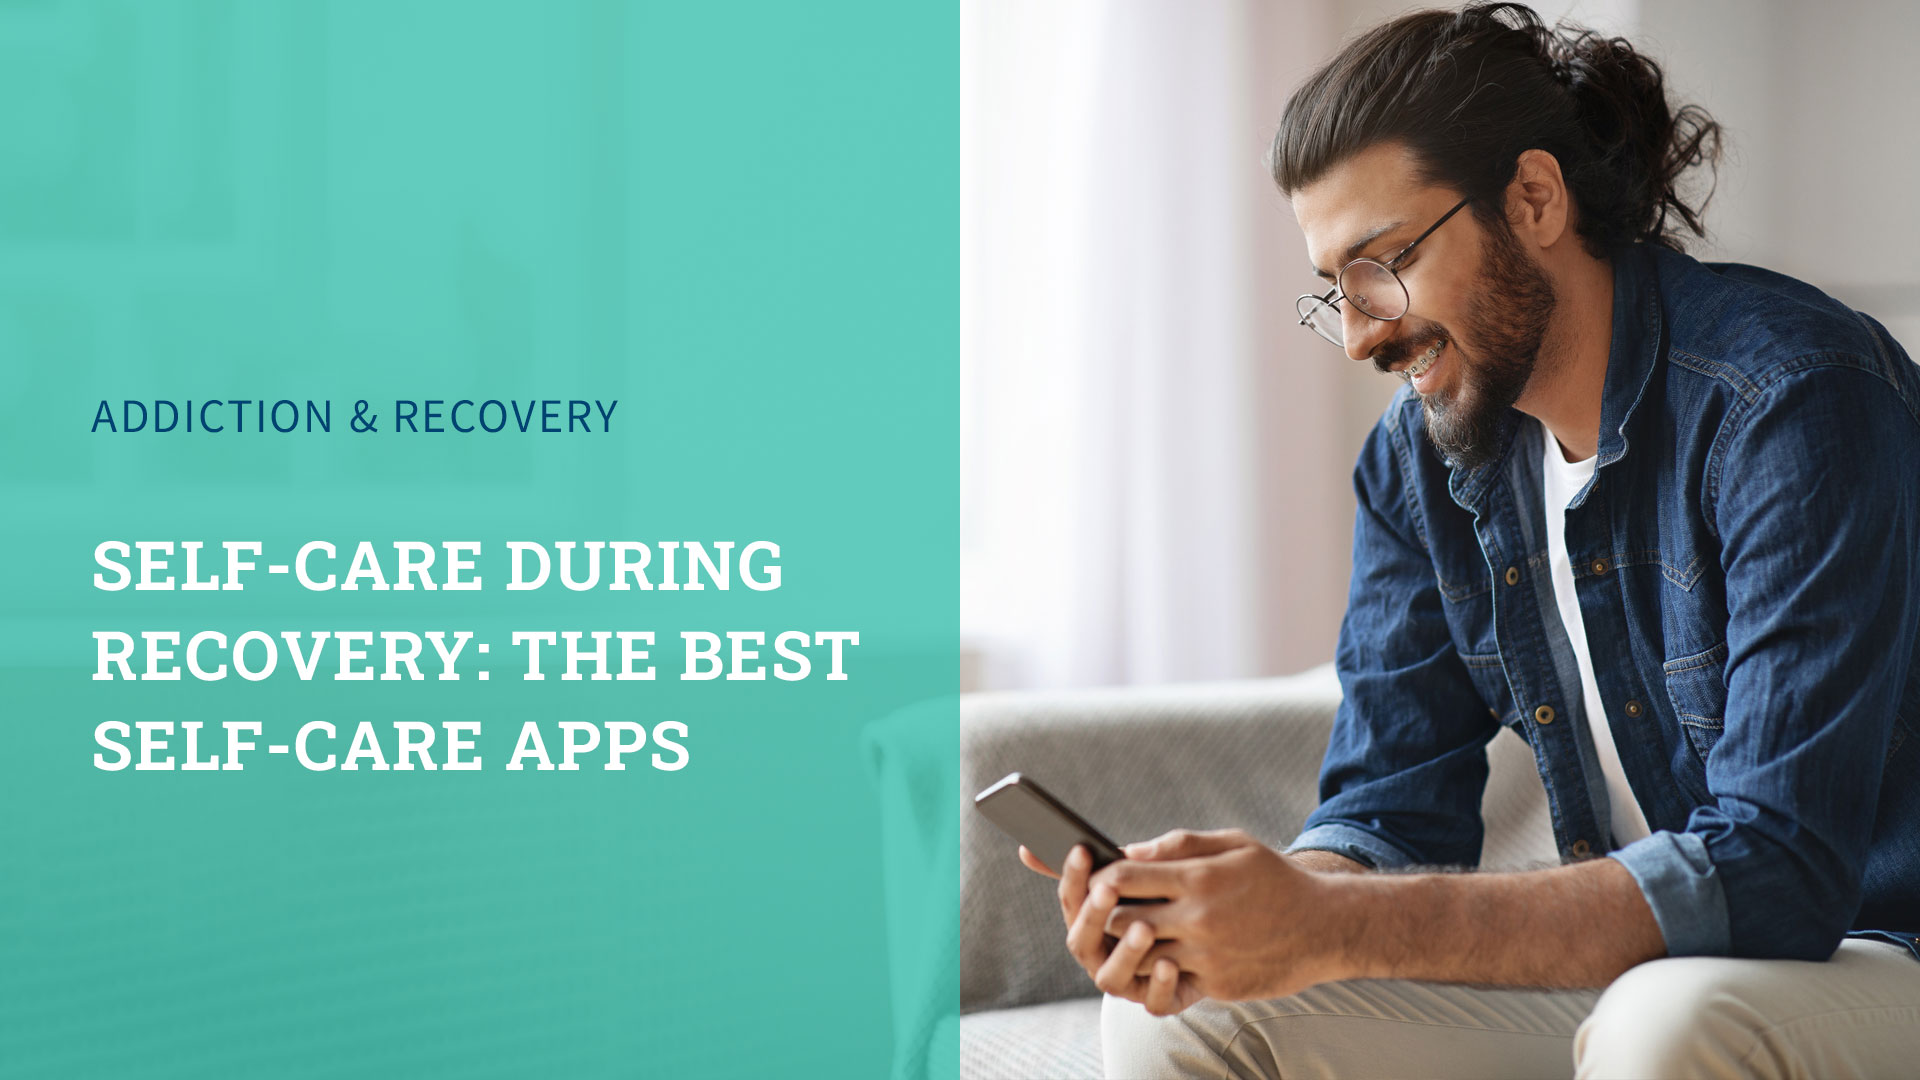 Self-Care During Recovery: The Best Self-Care Apps